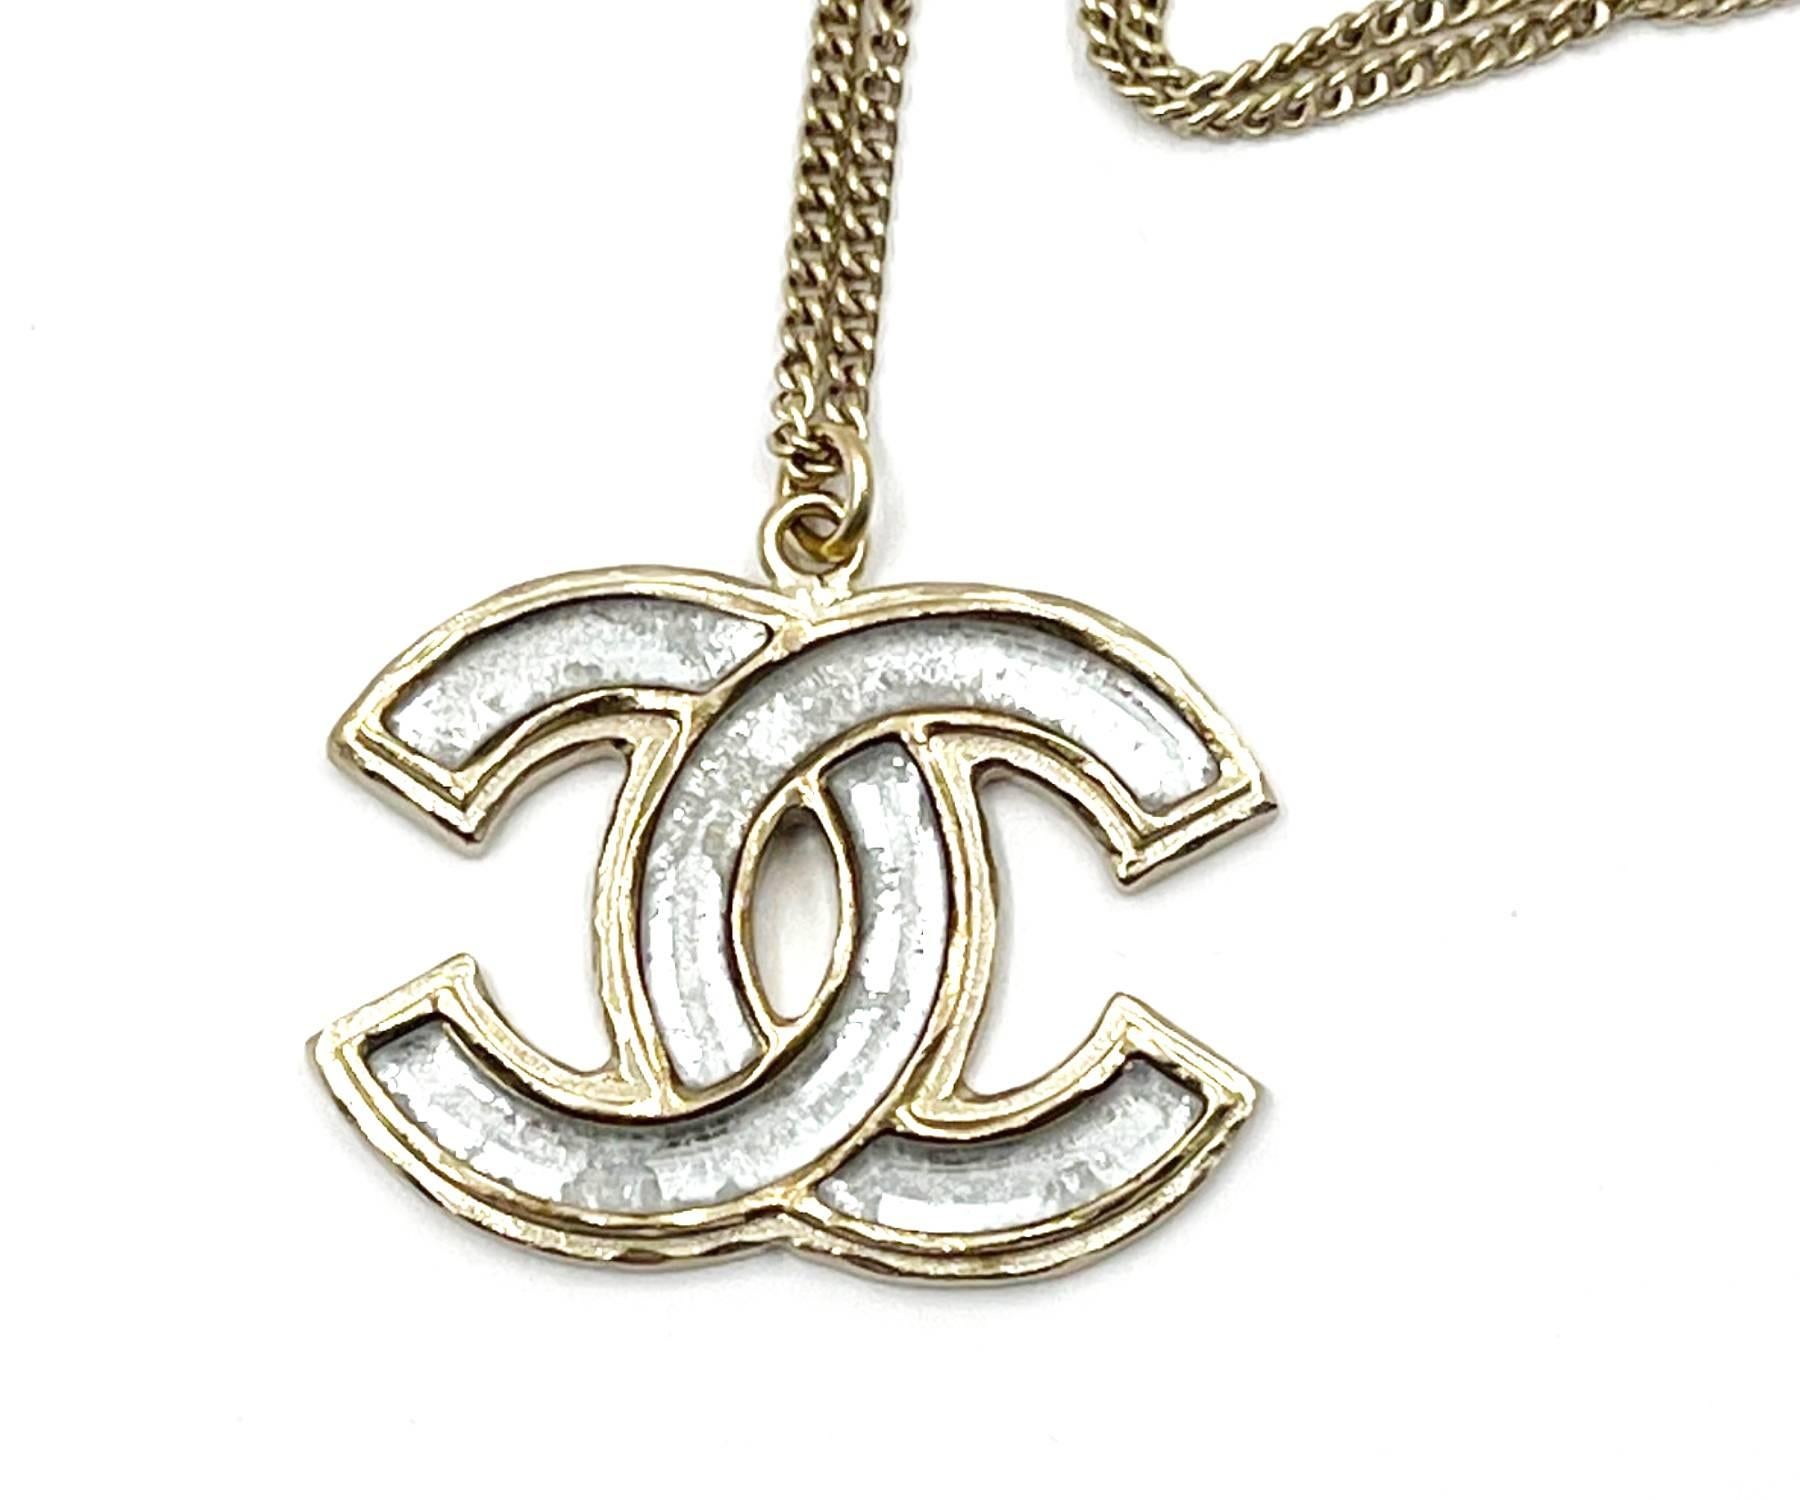 Chanel Gold CC Clear Enamel Pendant Necklace

*Marked 12
*Made in Italy

-The chain is approximately 16.5″ to 23″ long
-Pendant- approximately 1.25″ x 1″
-Very classic and pretty
-In a pristine condition

2132-43345